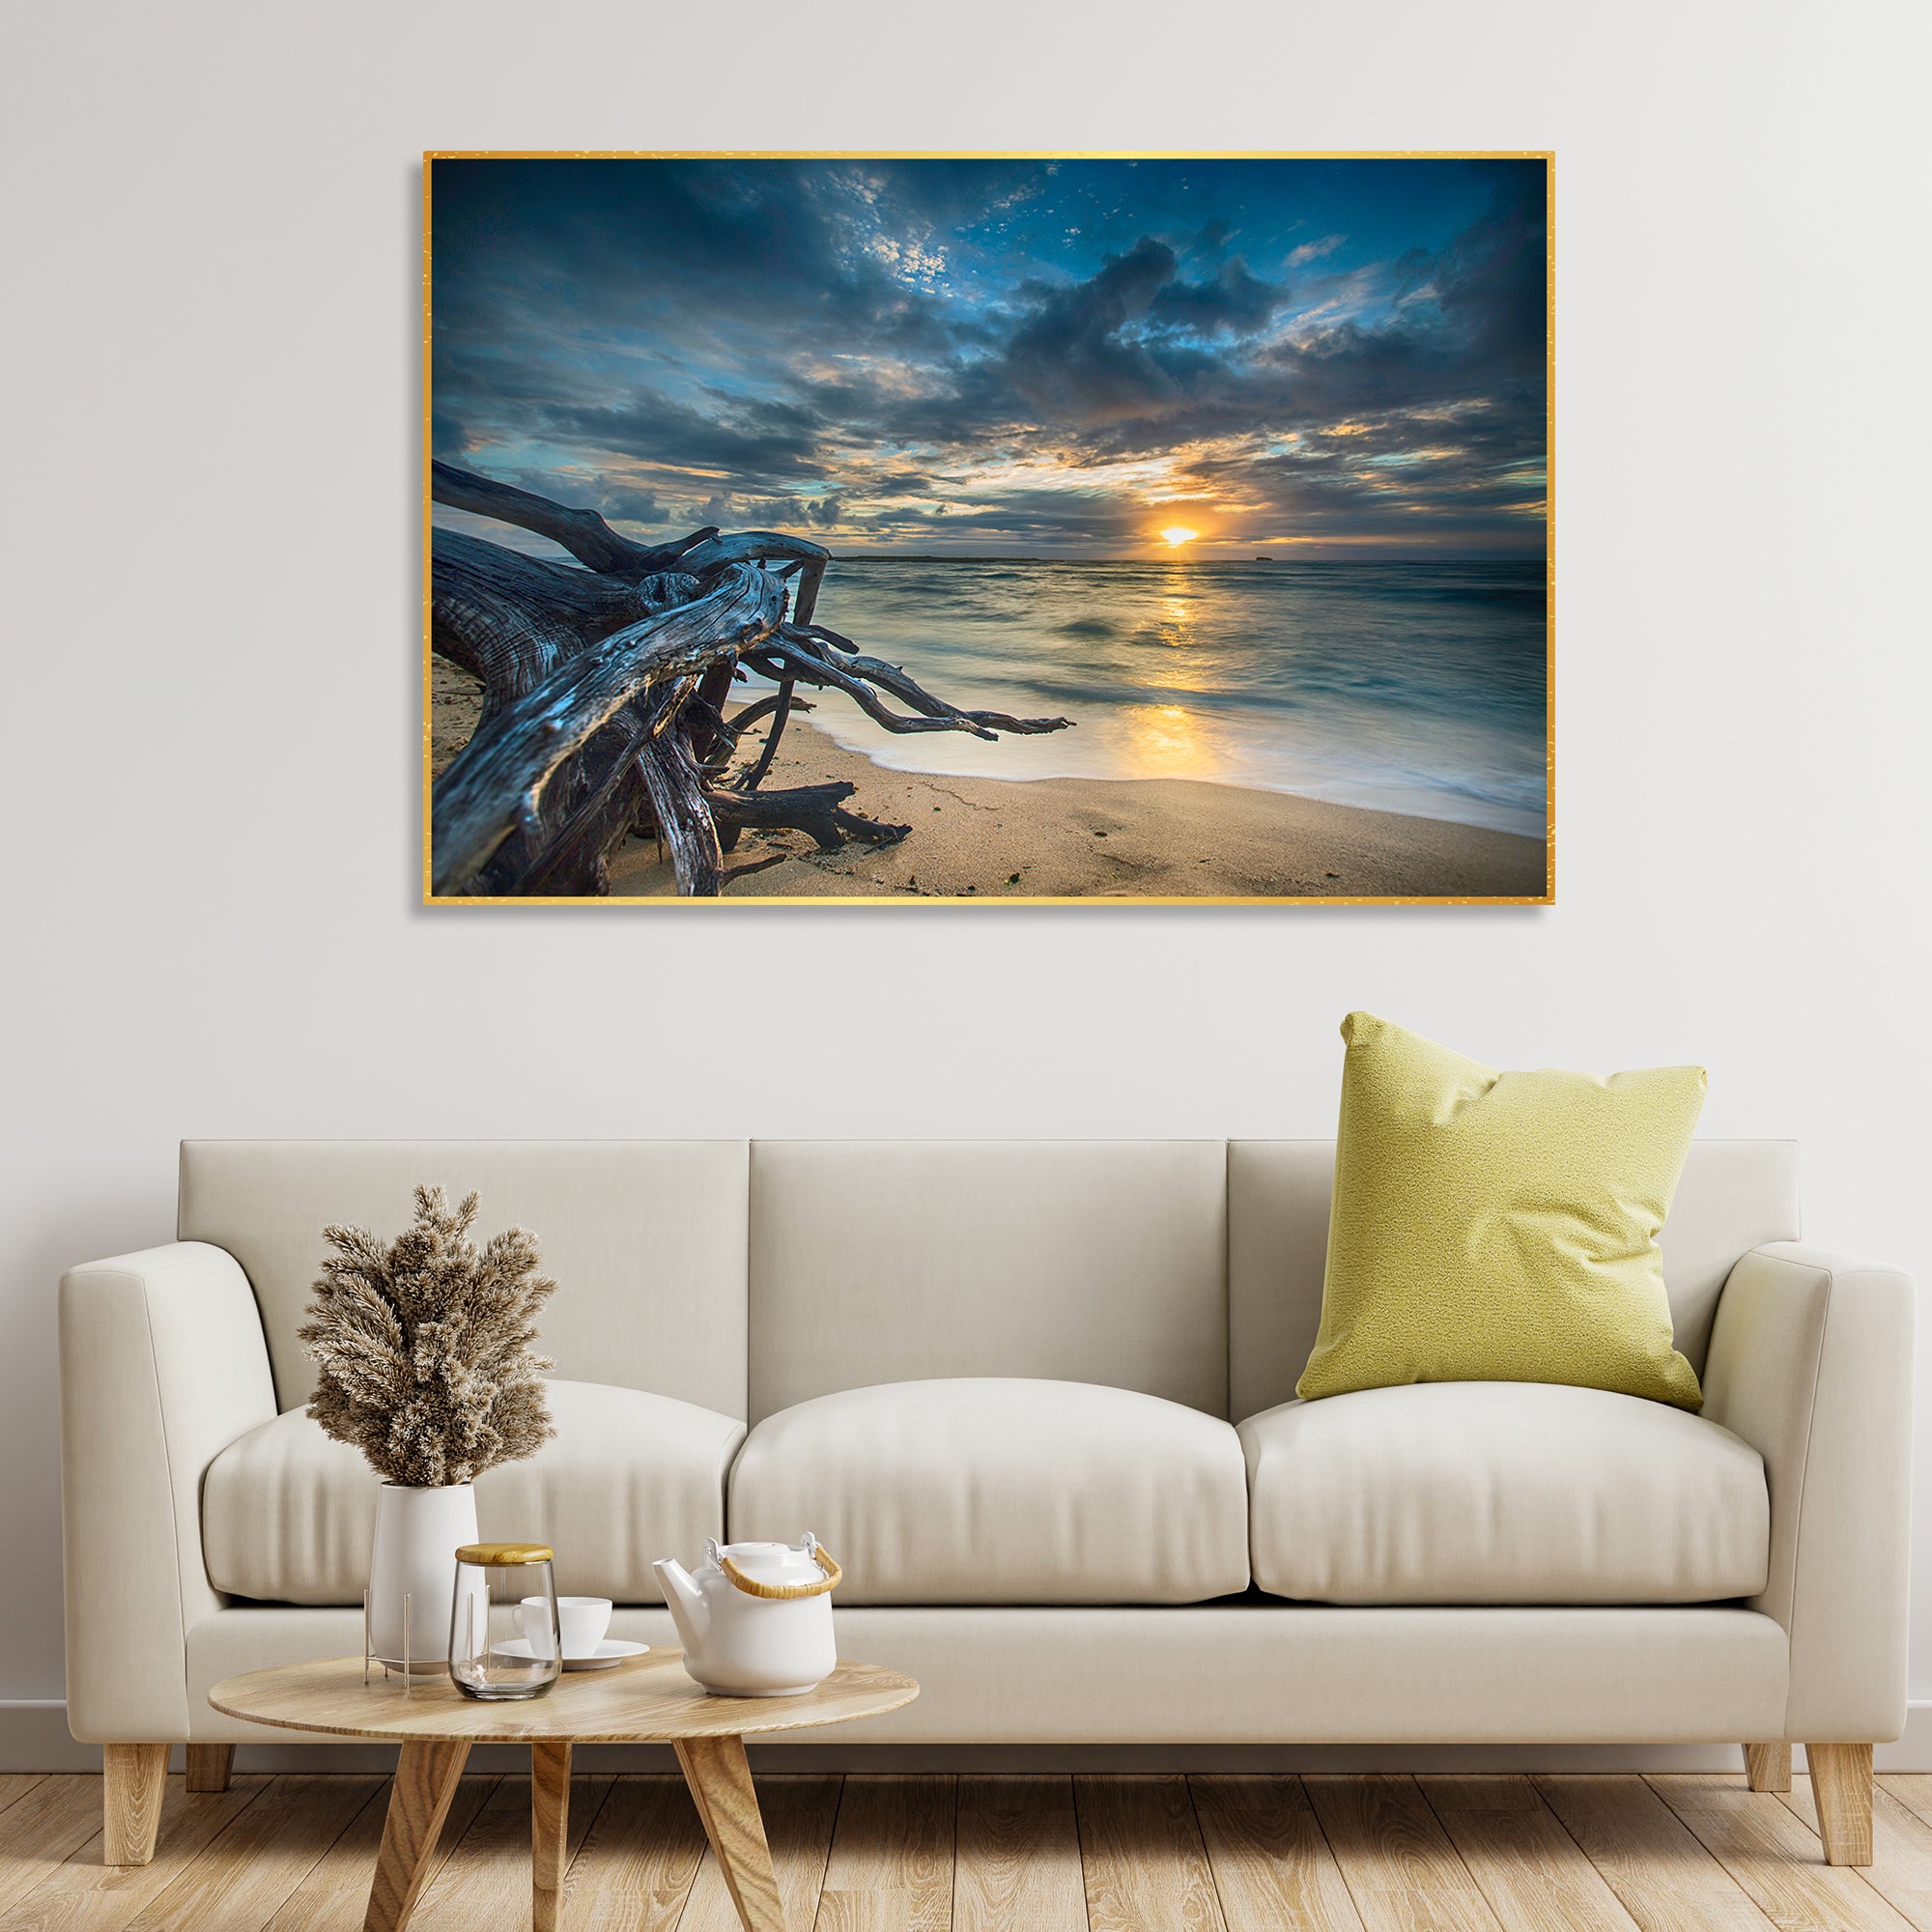 Sunset at Beach Field Wall Painting Floating Canvas